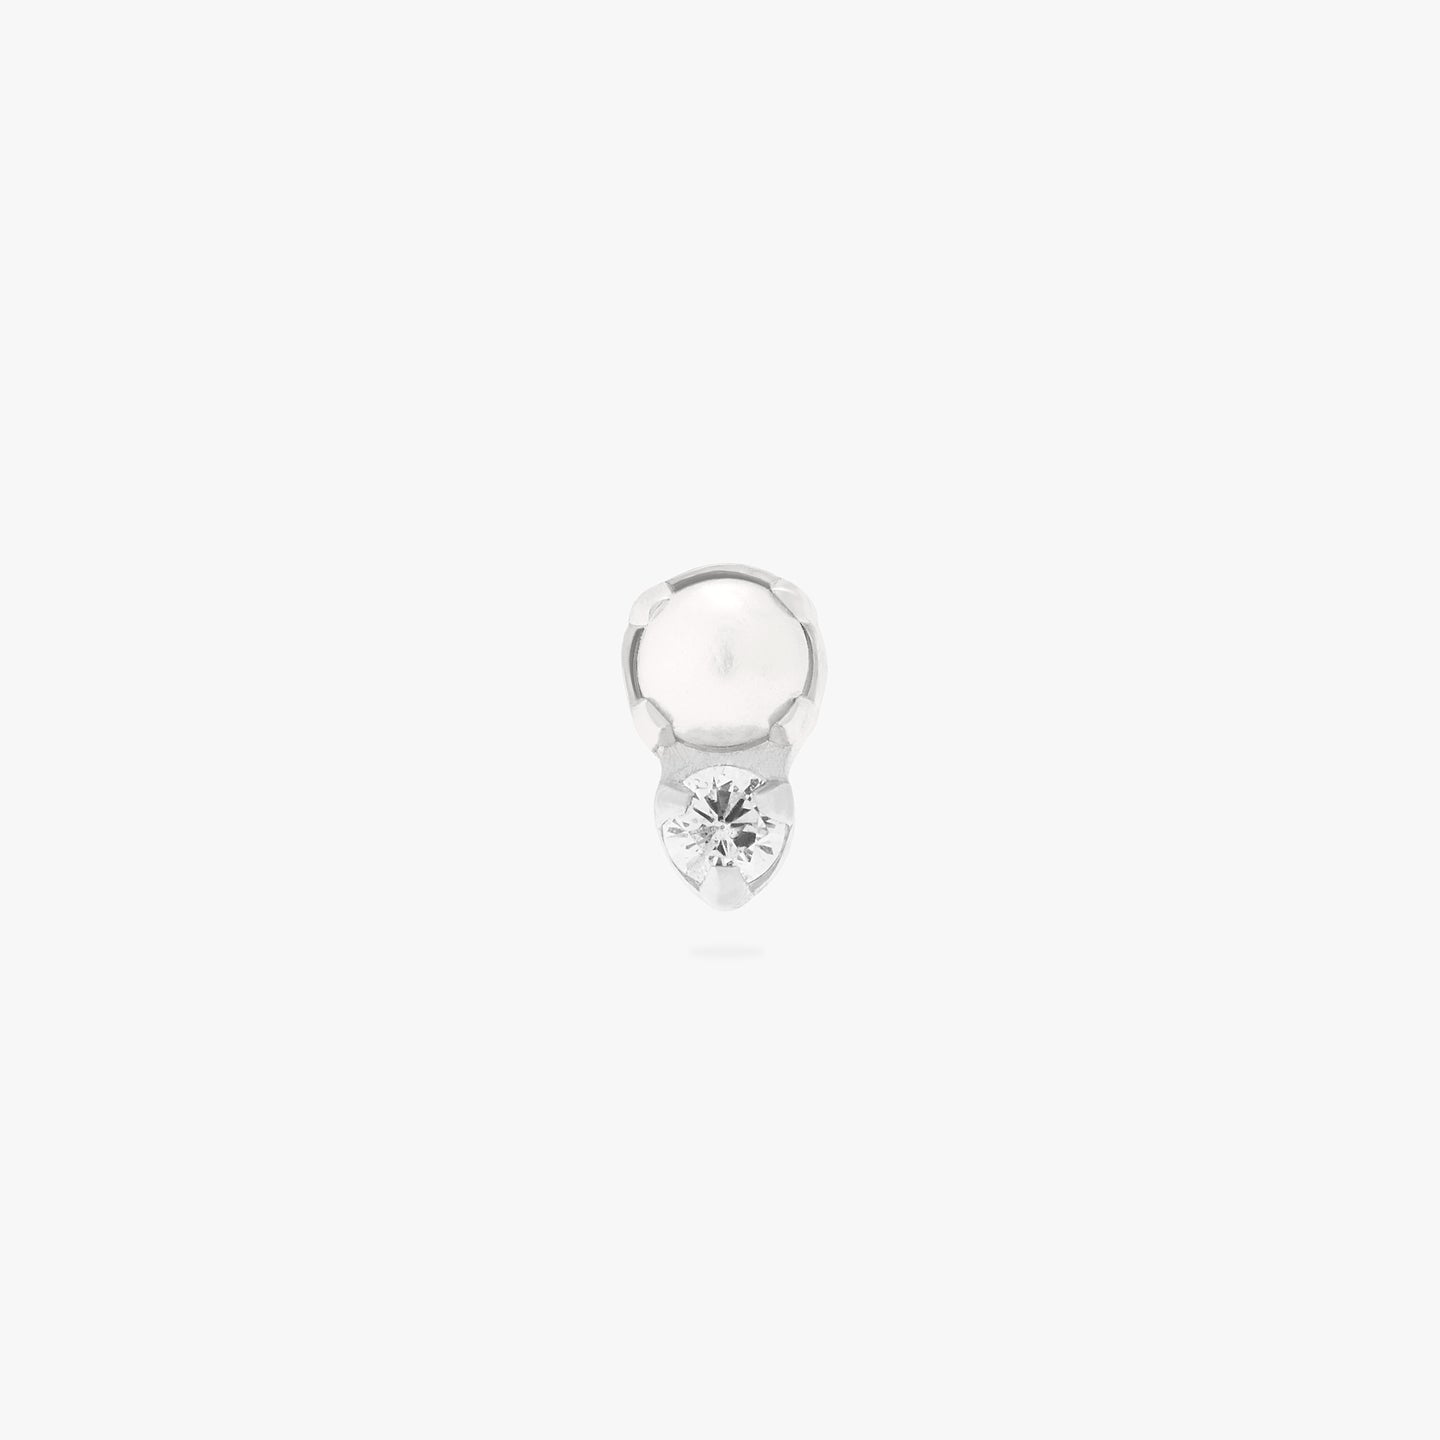 This is an image of a flatback top which has a pearl stacked over silver/clear CZ and then a silver labret that has a circle disc with the 